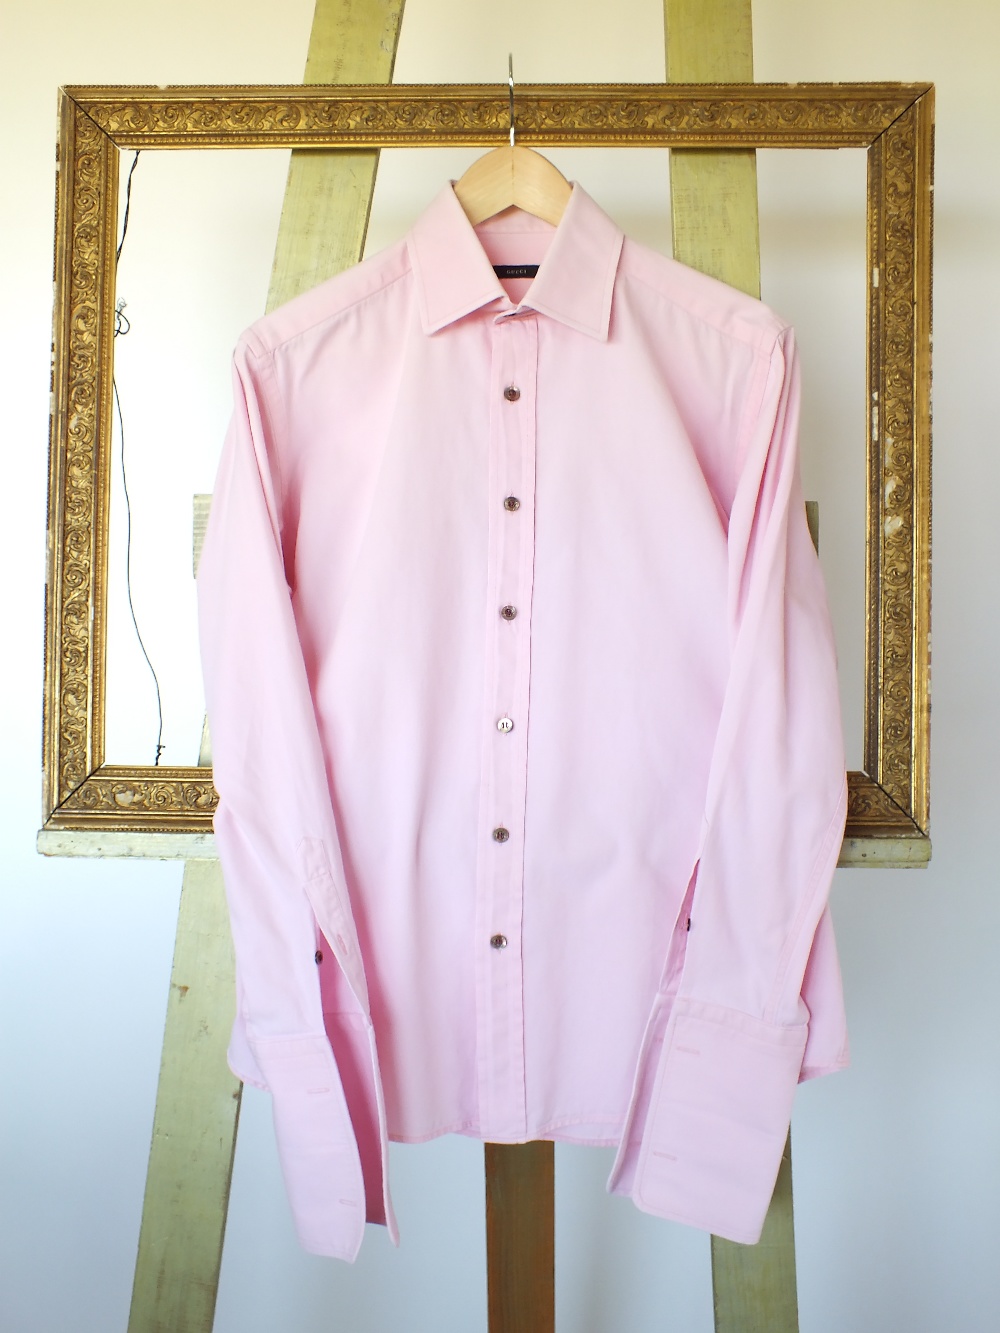 A Gucci shirt, pink, with black buttons,